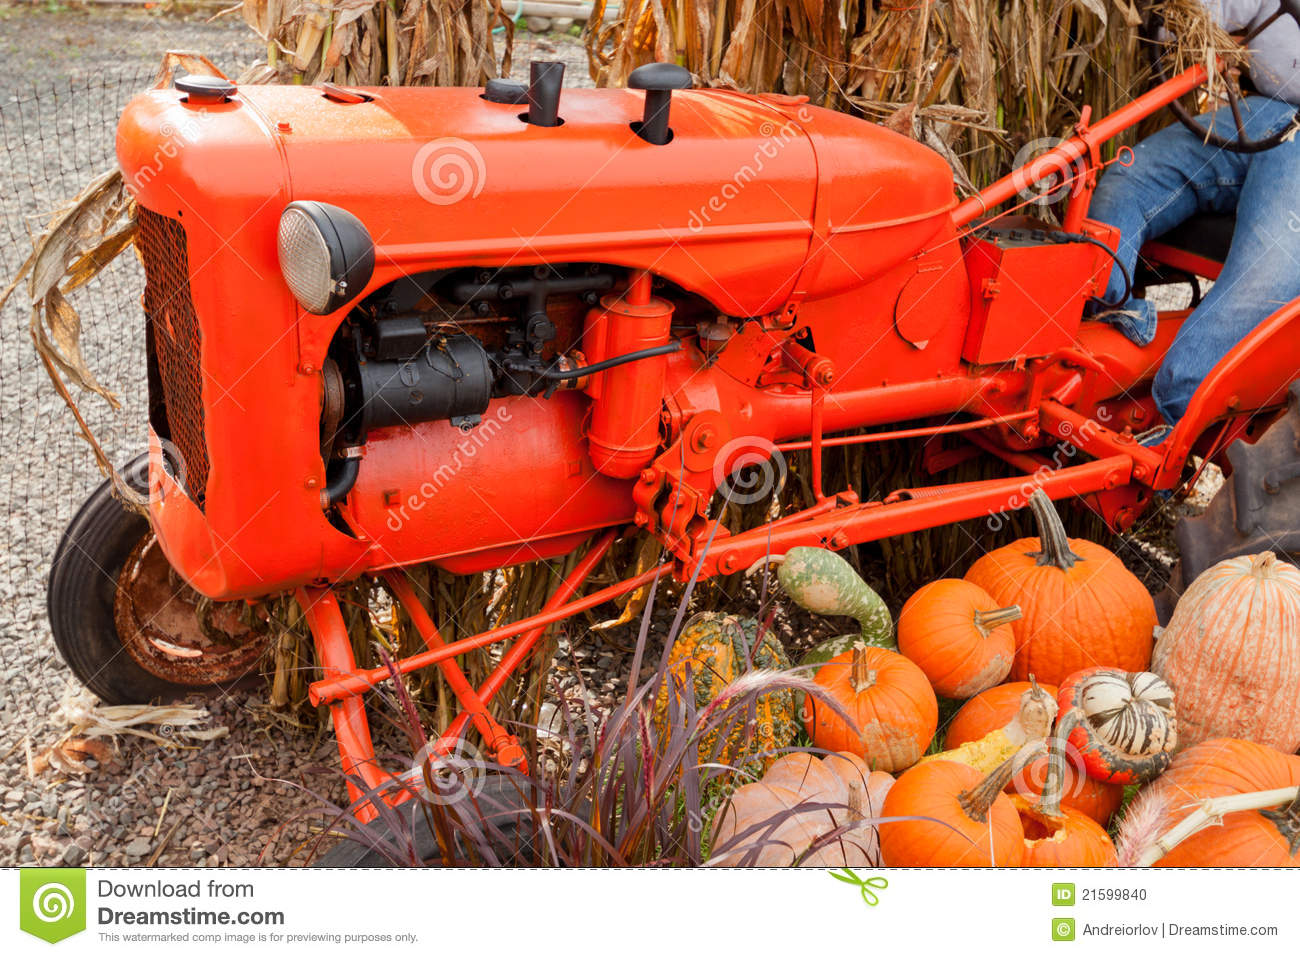 Fall Decorations At The Farm  Stock Photo   Image  21599840